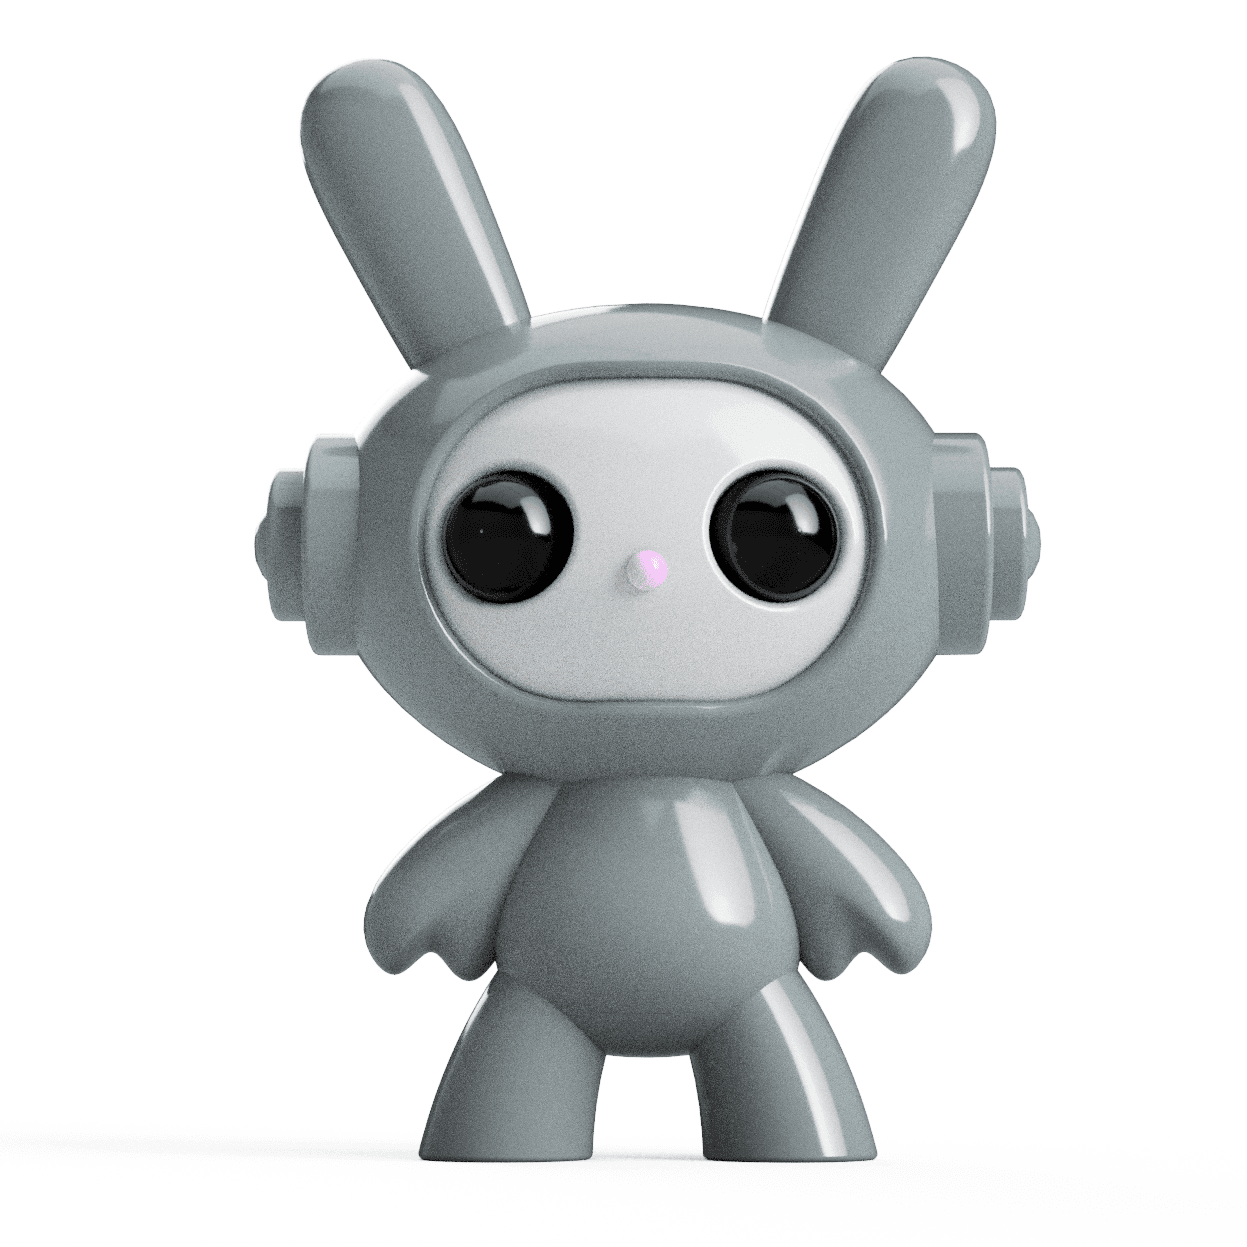 3D Printable Space Bunny Figure STL File - Perfect for Personal & Commercial Use 3d model